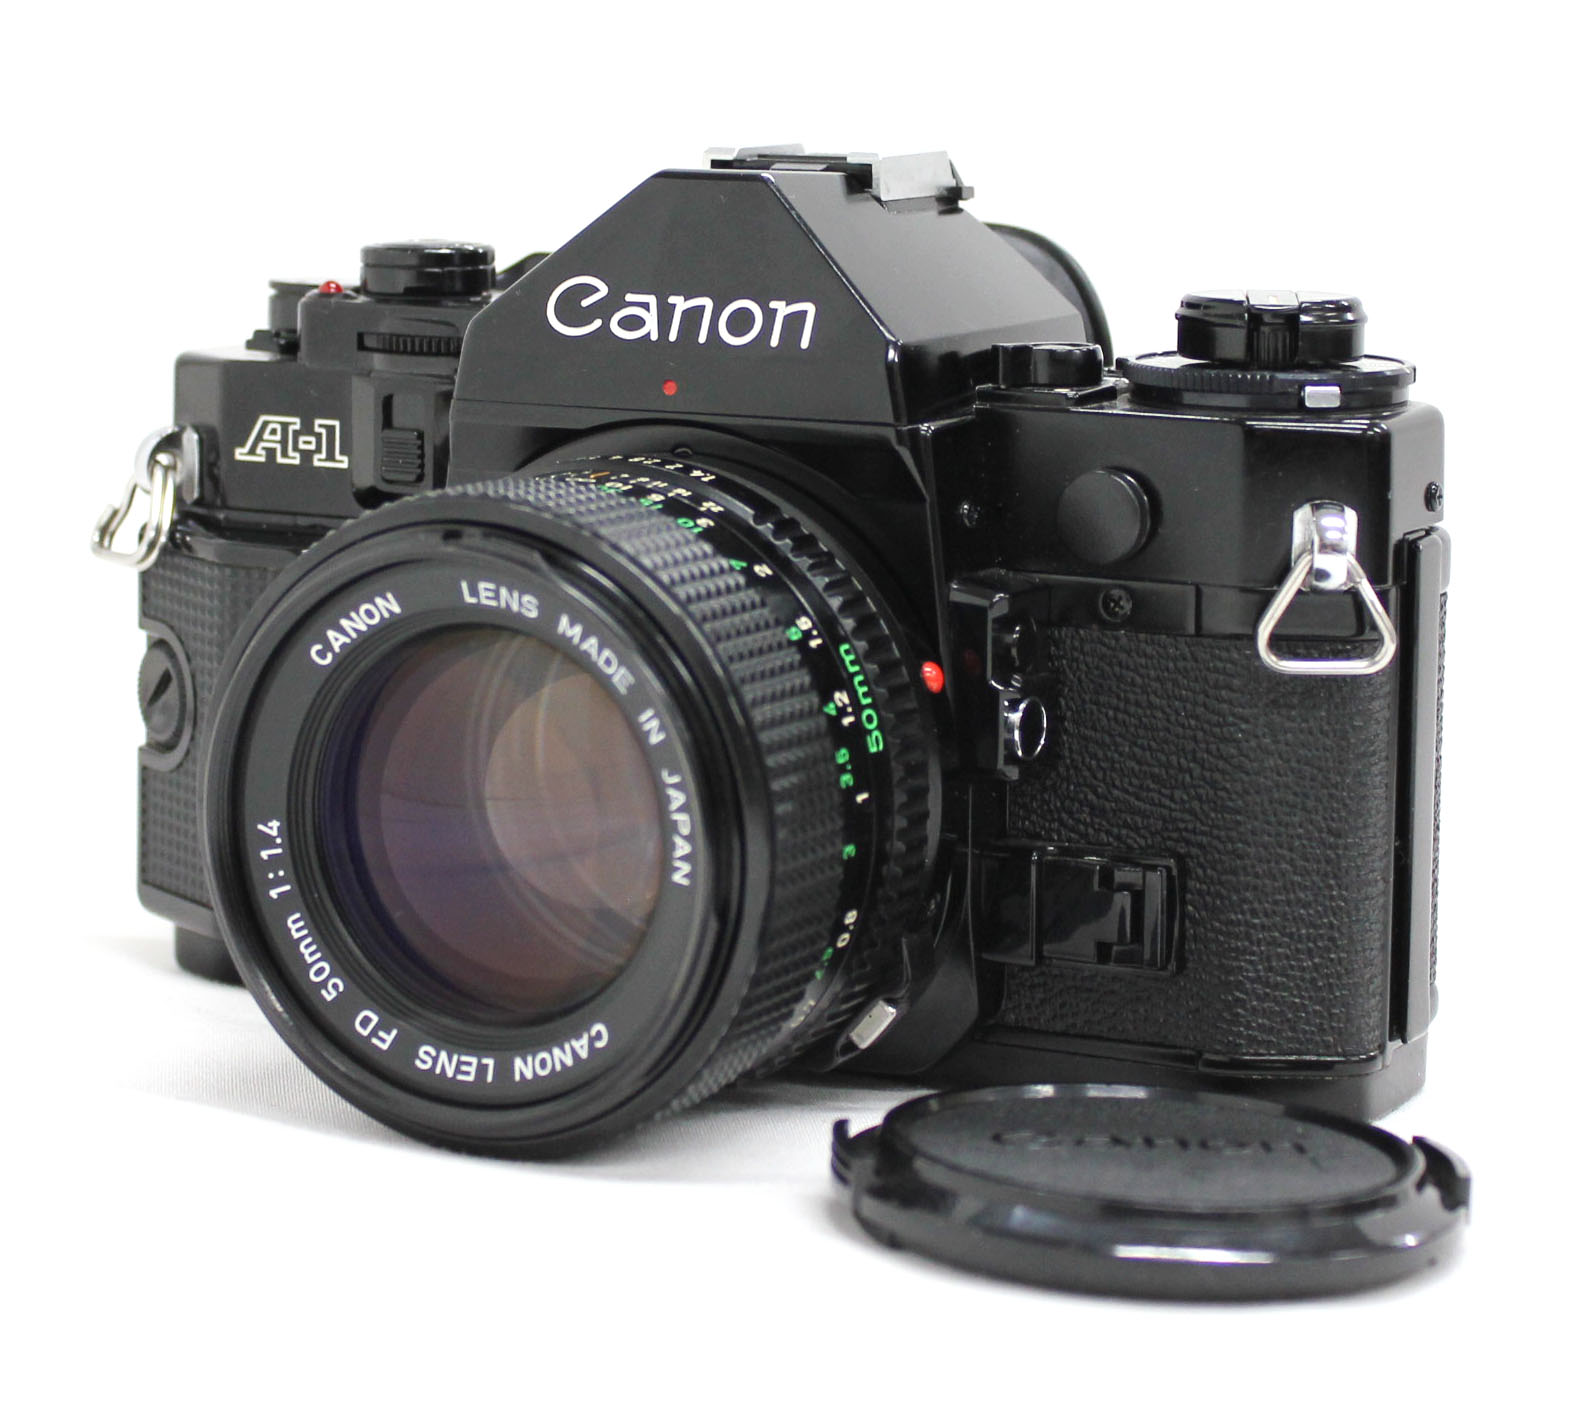 Japan Used Camera Shop | [Excellent++++] Canon A-1 35mm SLR Film Camera with New FD NFD 50mm F/1.4 Lens from Japan